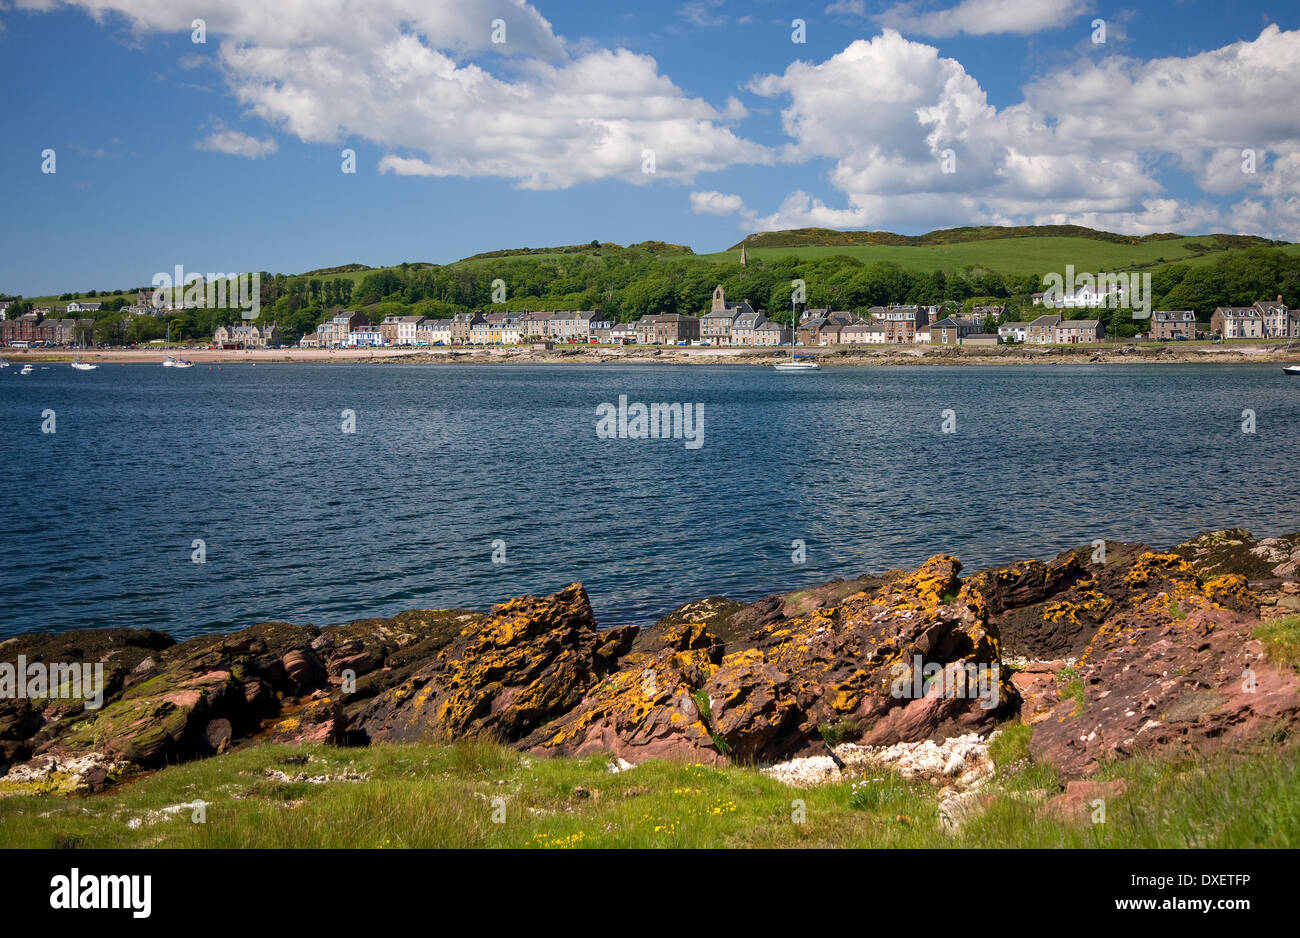 View from the south east side of millport bay towards Millport,Isle of Cumbrae,Firth of Clyde,Cumbrae Island. Stock Photo